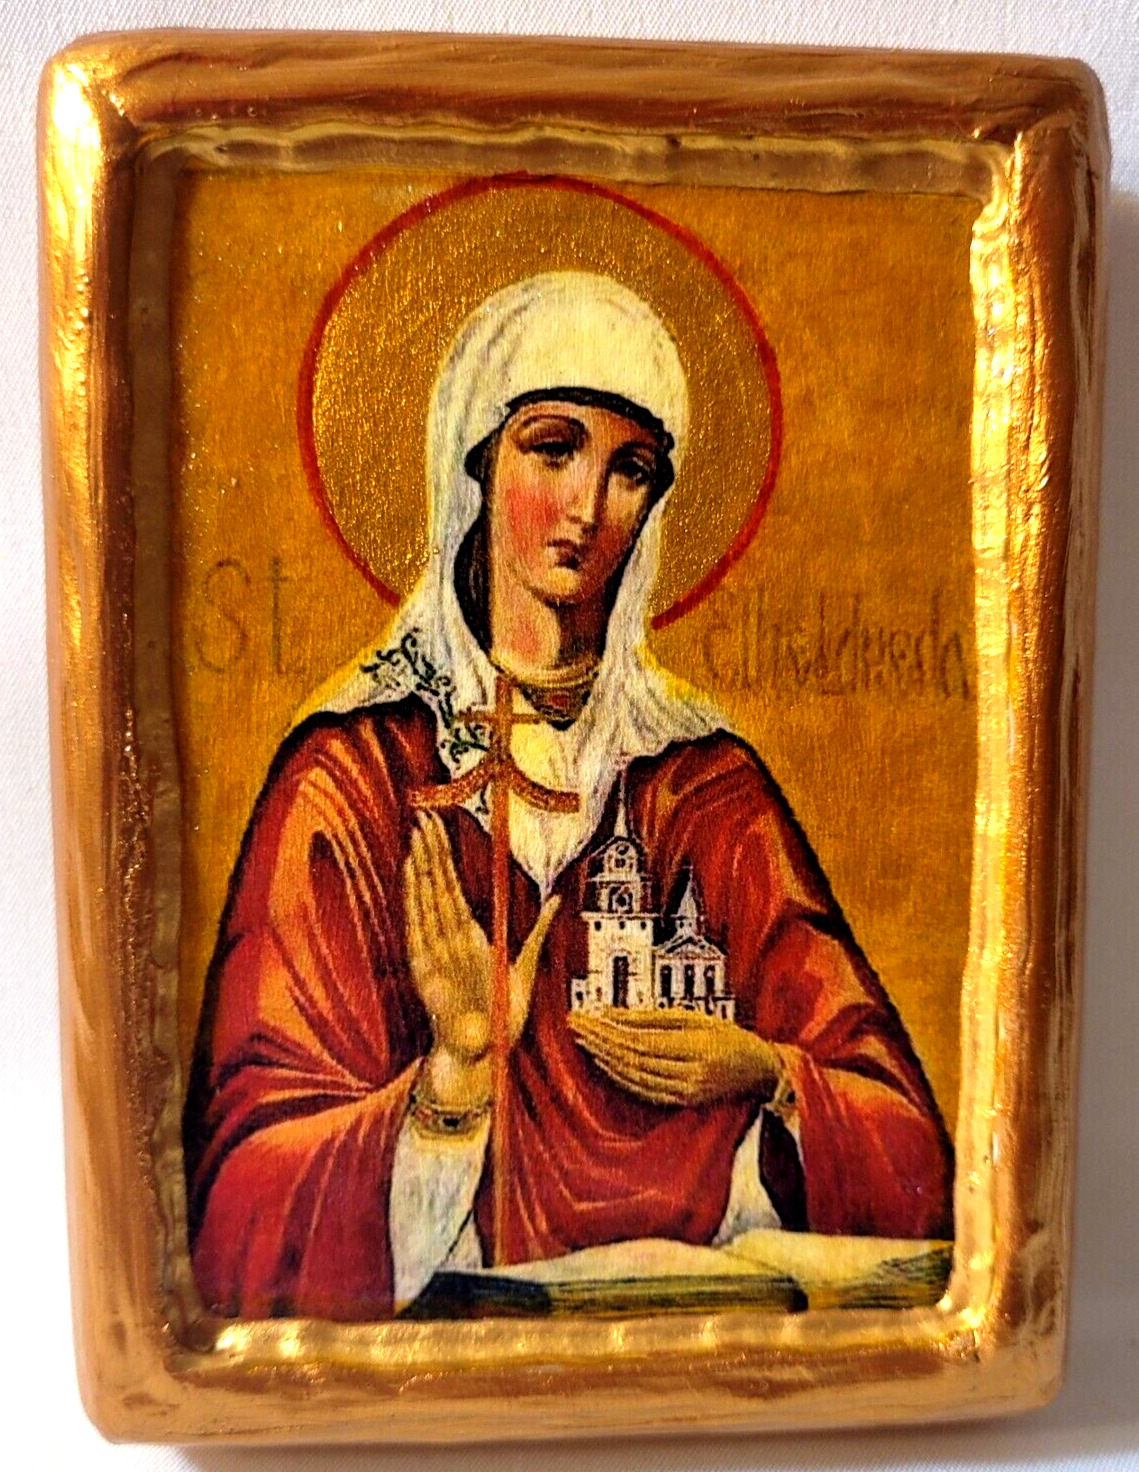 Saint Audrey Etheldreda Of Ely Anglican Roman Catholic and Eastern Orthodox Icon